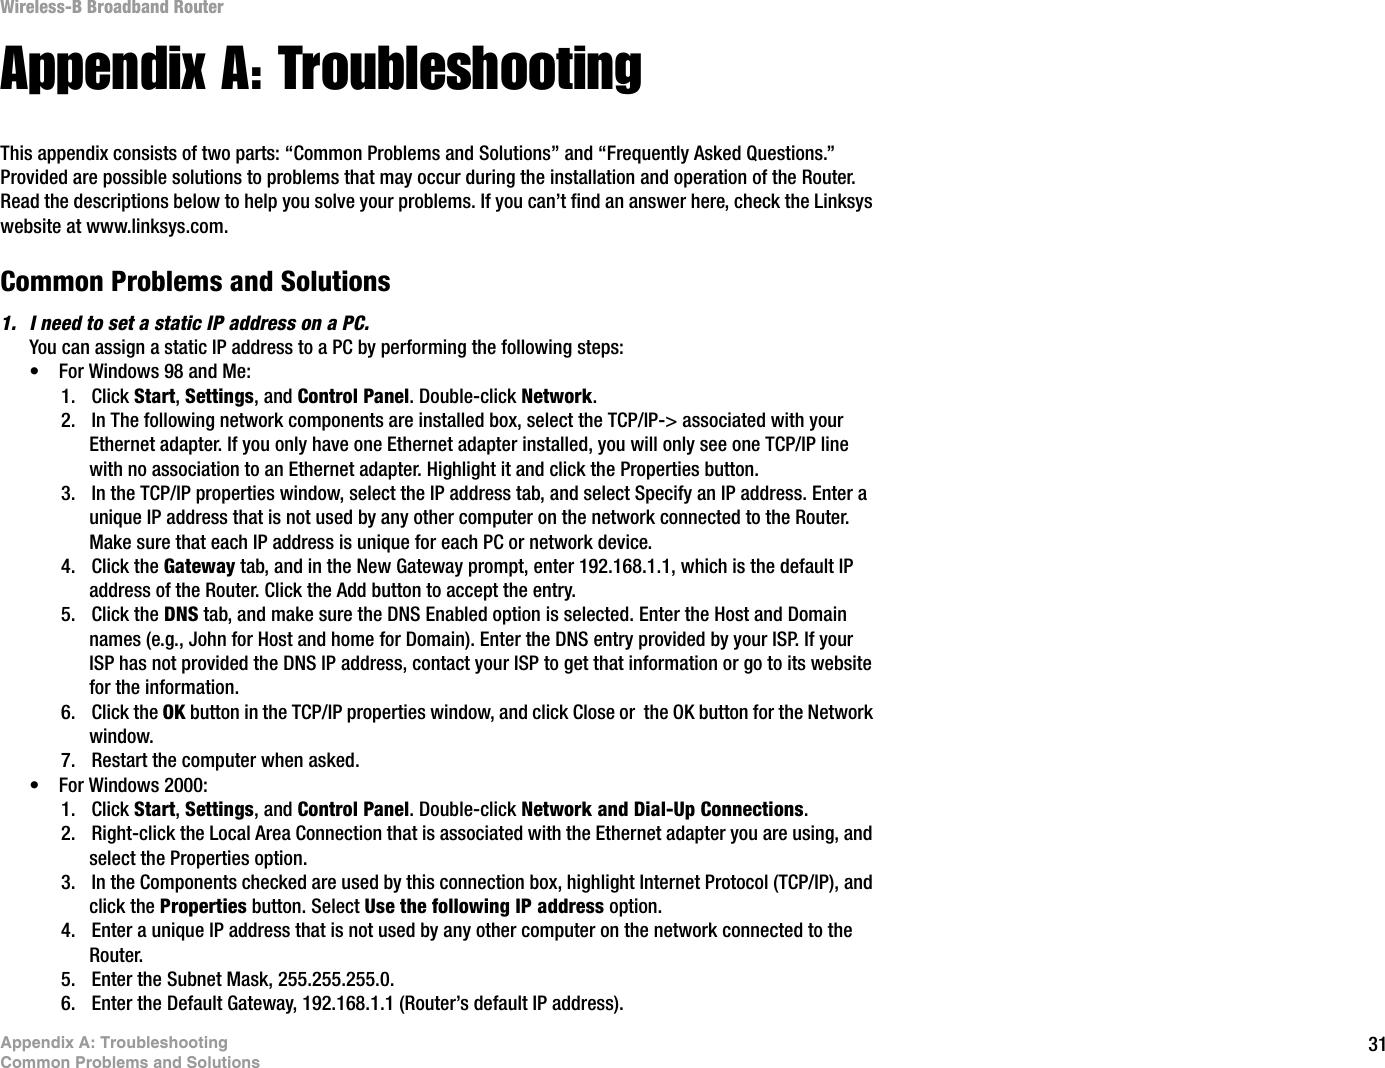 31Appendix A: TroubleshootingCommon Problems and SolutionsWireless-B Broadband RouterAppendix A: TroubleshootingThis appendix consists of two parts: “Common Problems and Solutions” and “Frequently Asked Questions.” Provided are possible solutions to problems that may occur during the installation and operation of the Router. Read the descriptions below to help you solve your problems. If you can’t find an answer here, check the Linksys website at www.linksys.com.Common Problems and Solutions1. I need to set a static IP address on a PC.You can assign a static IP address to a PC by performing the following steps:• For Windows 98 and Me:1. Click Start,Settings, and Control Panel. Double-click Network.2. In The following network components are installed box, select the TCP/IP-&gt; associated with your Ethernet adapter. If you only have one Ethernet adapter installed, you will only see one TCP/IP line with no association to an Ethernet adapter. Highlight it and click the Properties button.3. In the TCP/IP properties window, select the IP address tab, and select Specify an IP address. Enter a unique IP address that is not used by any other computer on the network connected to the Router. Make sure that each IP address is unique for each PC or network device.4. Click the Gateway tab, and in the New Gateway prompt, enter 192.168.1.1, which is the default IP address of the Router. Click the Add button to accept the entry.5. Click the DNS tab, and make sure the DNS Enabled option is selected. Enter the Host and Domain names (e.g., John for Host and home for Domain). Enter the DNS entry provided by your ISP. If your ISP has not provided the DNS IP address, contact your ISP to get that information or go to its website for the information.6. Click the OK button in the TCP/IP properties window, and click Close or  the OK button for the Network window.7. Restart the computer when asked.• For Windows 2000:1. Click Start,Settings, and Control Panel. Double-click Network and Dial-Up Connections.2. Right-click the Local Area Connection that is associated with the Ethernet adapter you are using, and select the Properties option.3. In the Components checked are used by this connection box, highlight Internet Protocol (TCP/IP), and click the Properties button. Select Use the following IP address option.4. Enter a unique IP address that is not used by any other computer on the network connected to the Router. 5. Enter the Subnet Mask, 255.255.255.0.6. Enter the Default Gateway, 192.168.1.1 (Router’s default IP address).